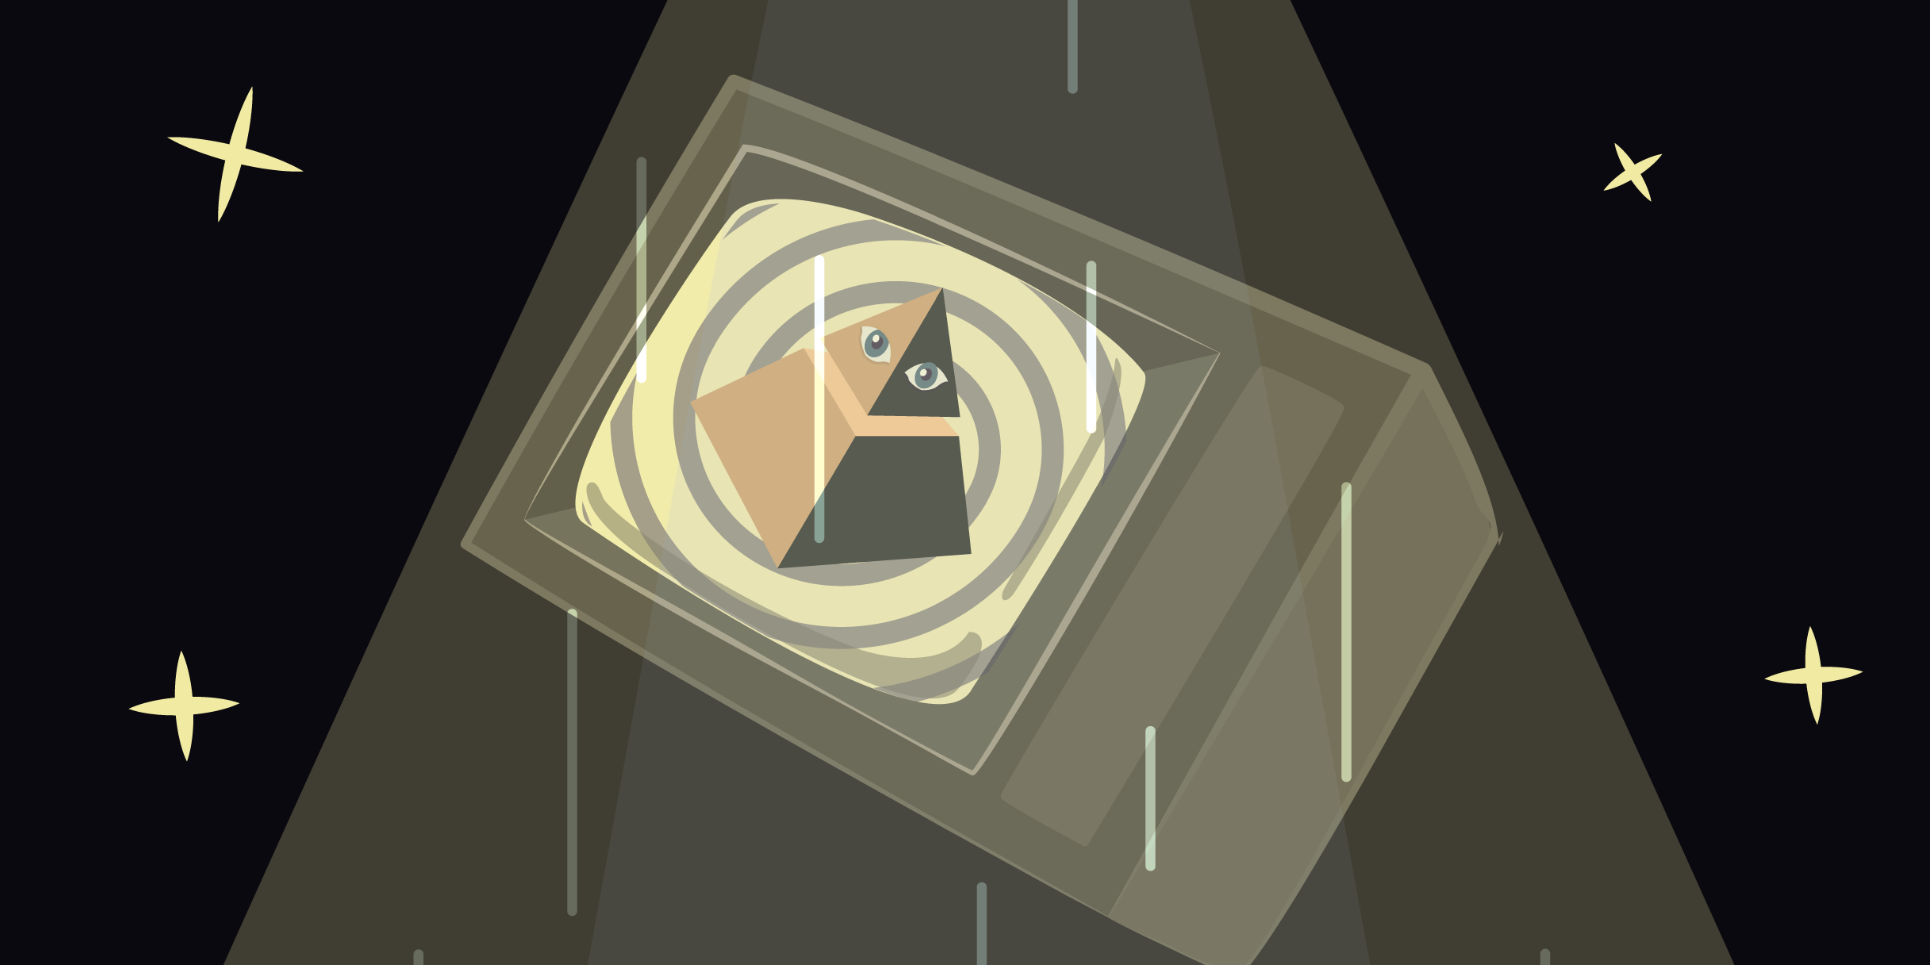 A cartoon drawing of a pyramid with a face on it